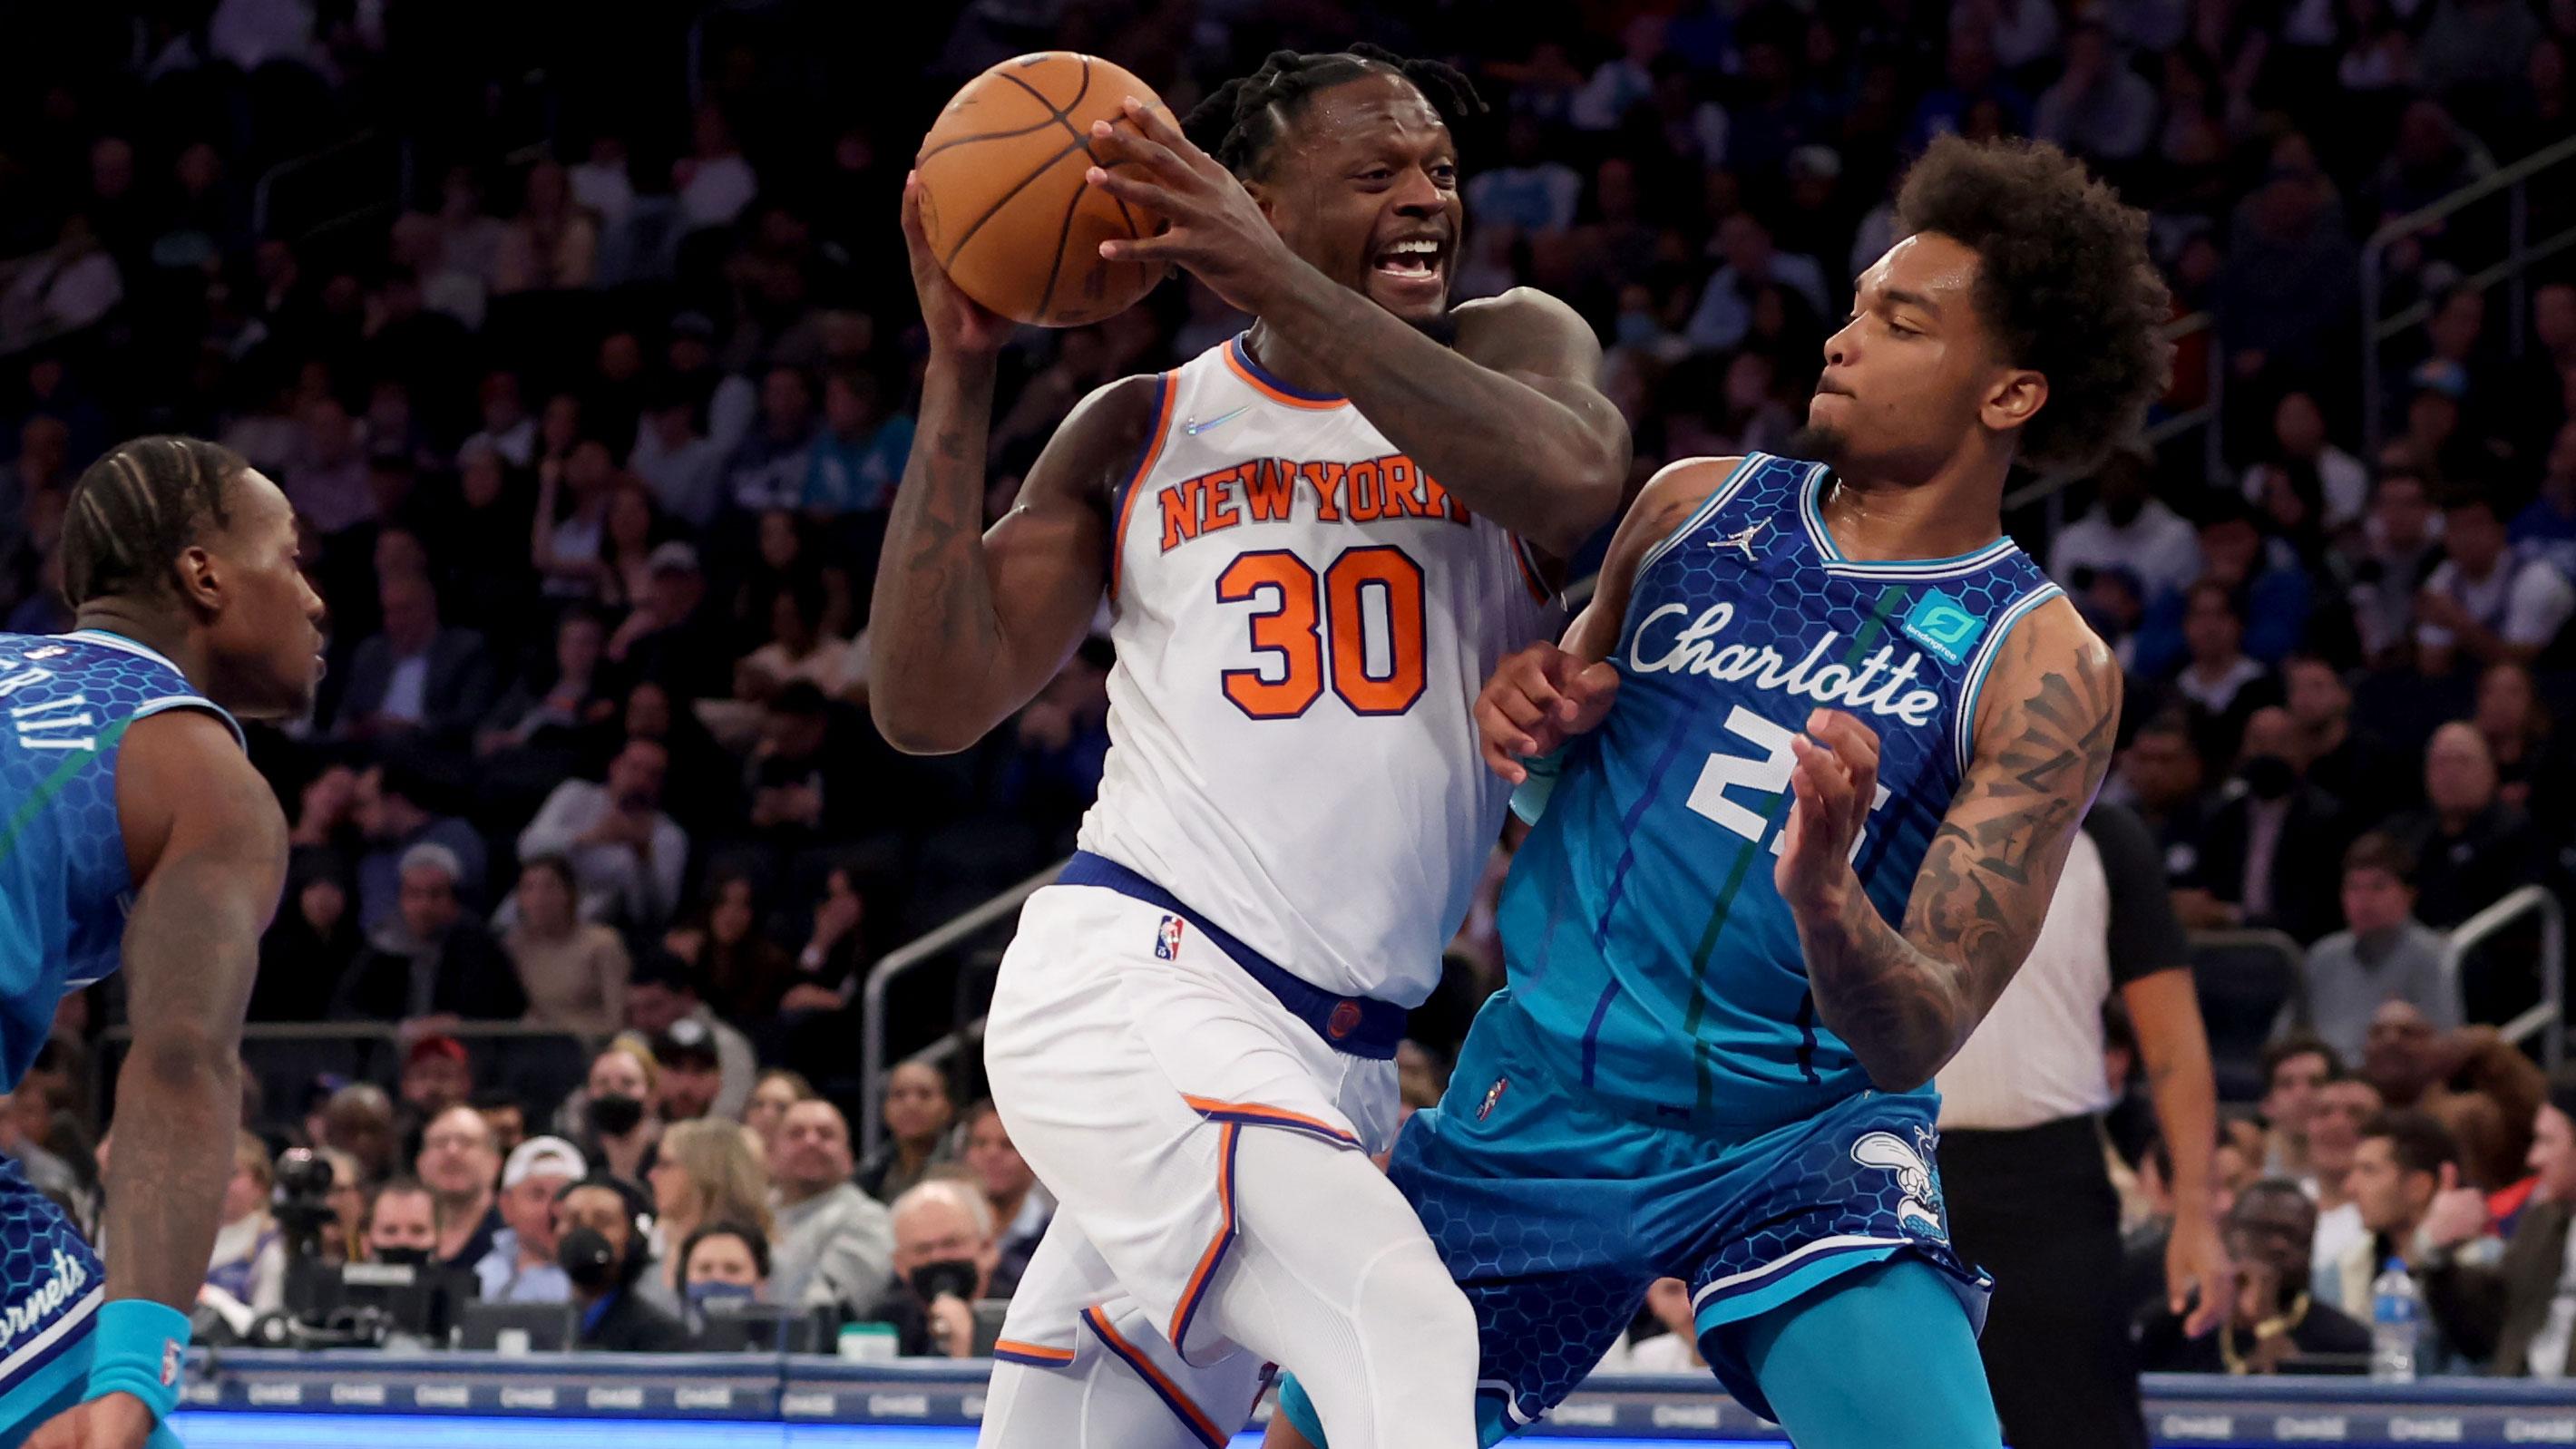 Mar 30, 2022; New York, New York, USA; New York Knicks forward Julius Randle (30) drives to the basket against Charlotte Hornets guard Terry Rozier (3) and forward P.J. Washington (25) during the fourth quarter at Madison Square Garden. / Brad Penner-USA TODAY Sports